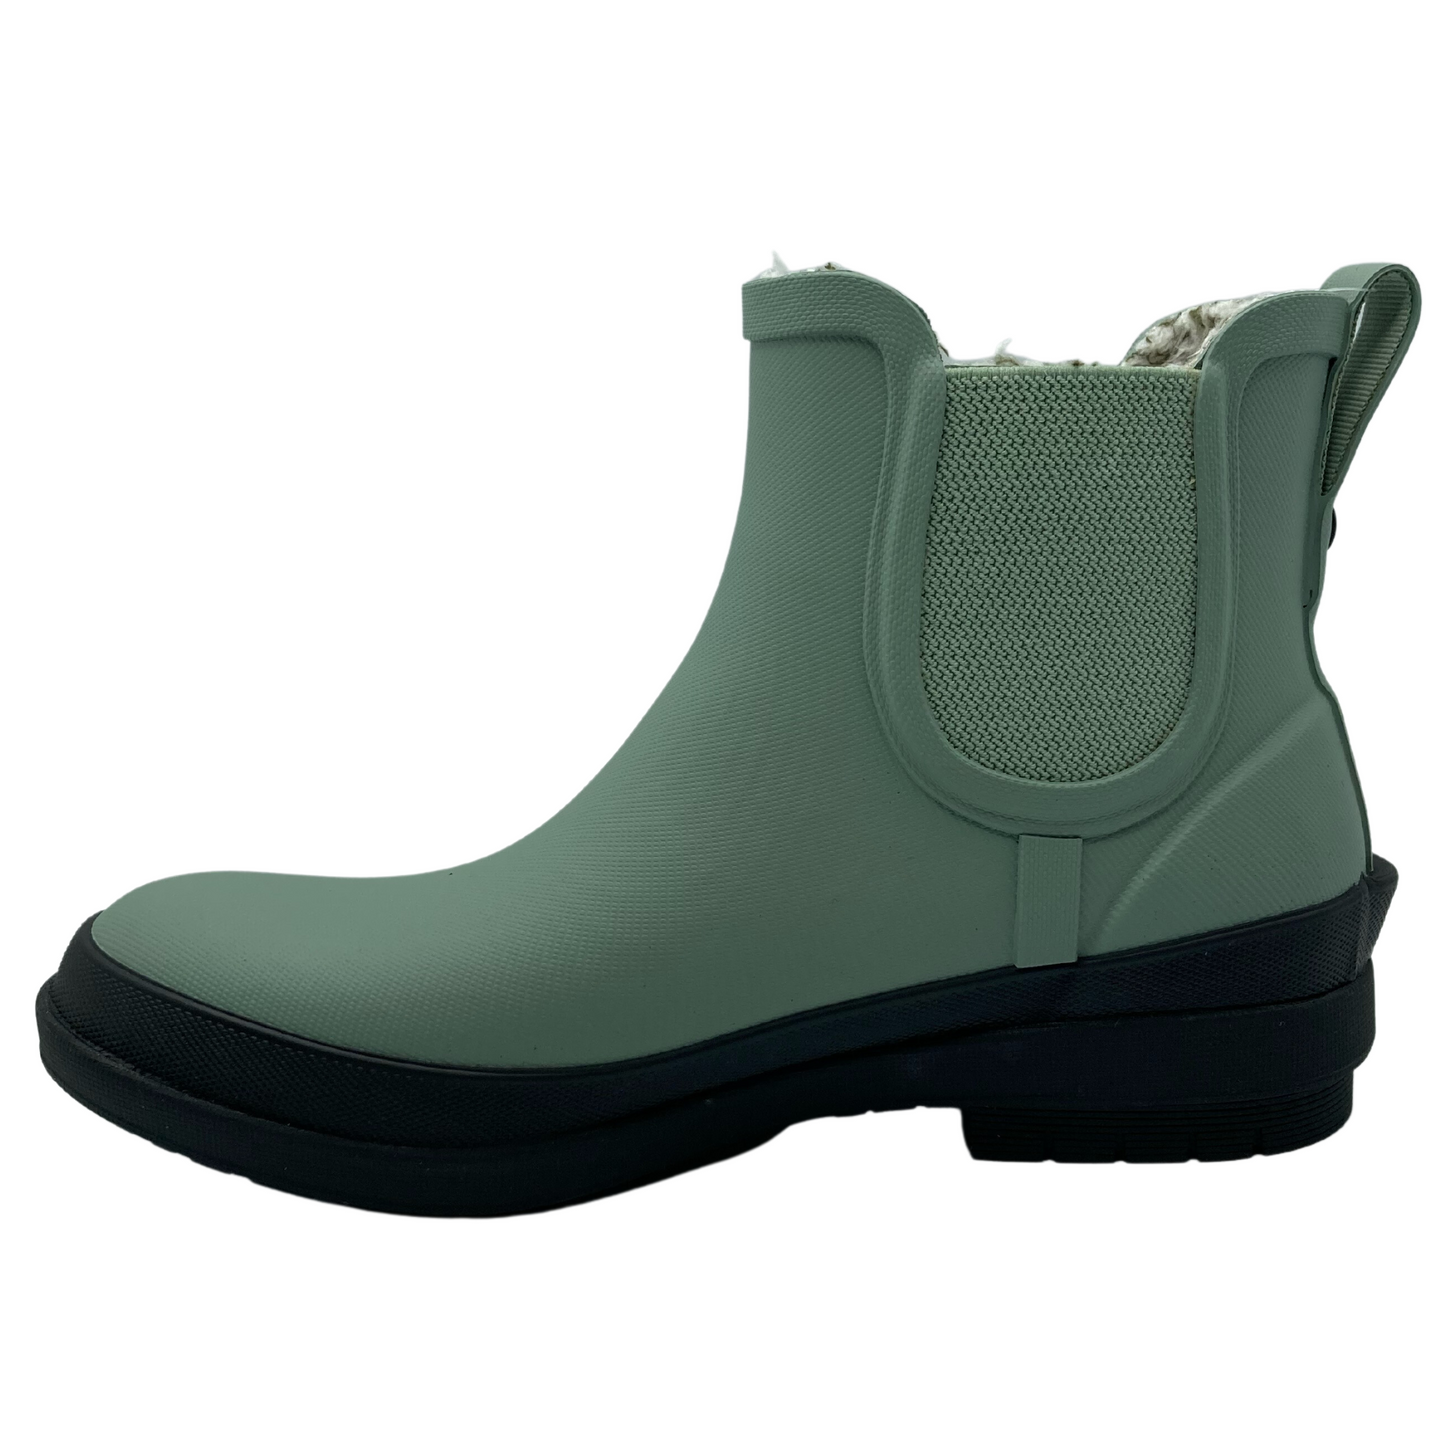 Left facing view of jade short rain boot with elastic side gore and black outsole